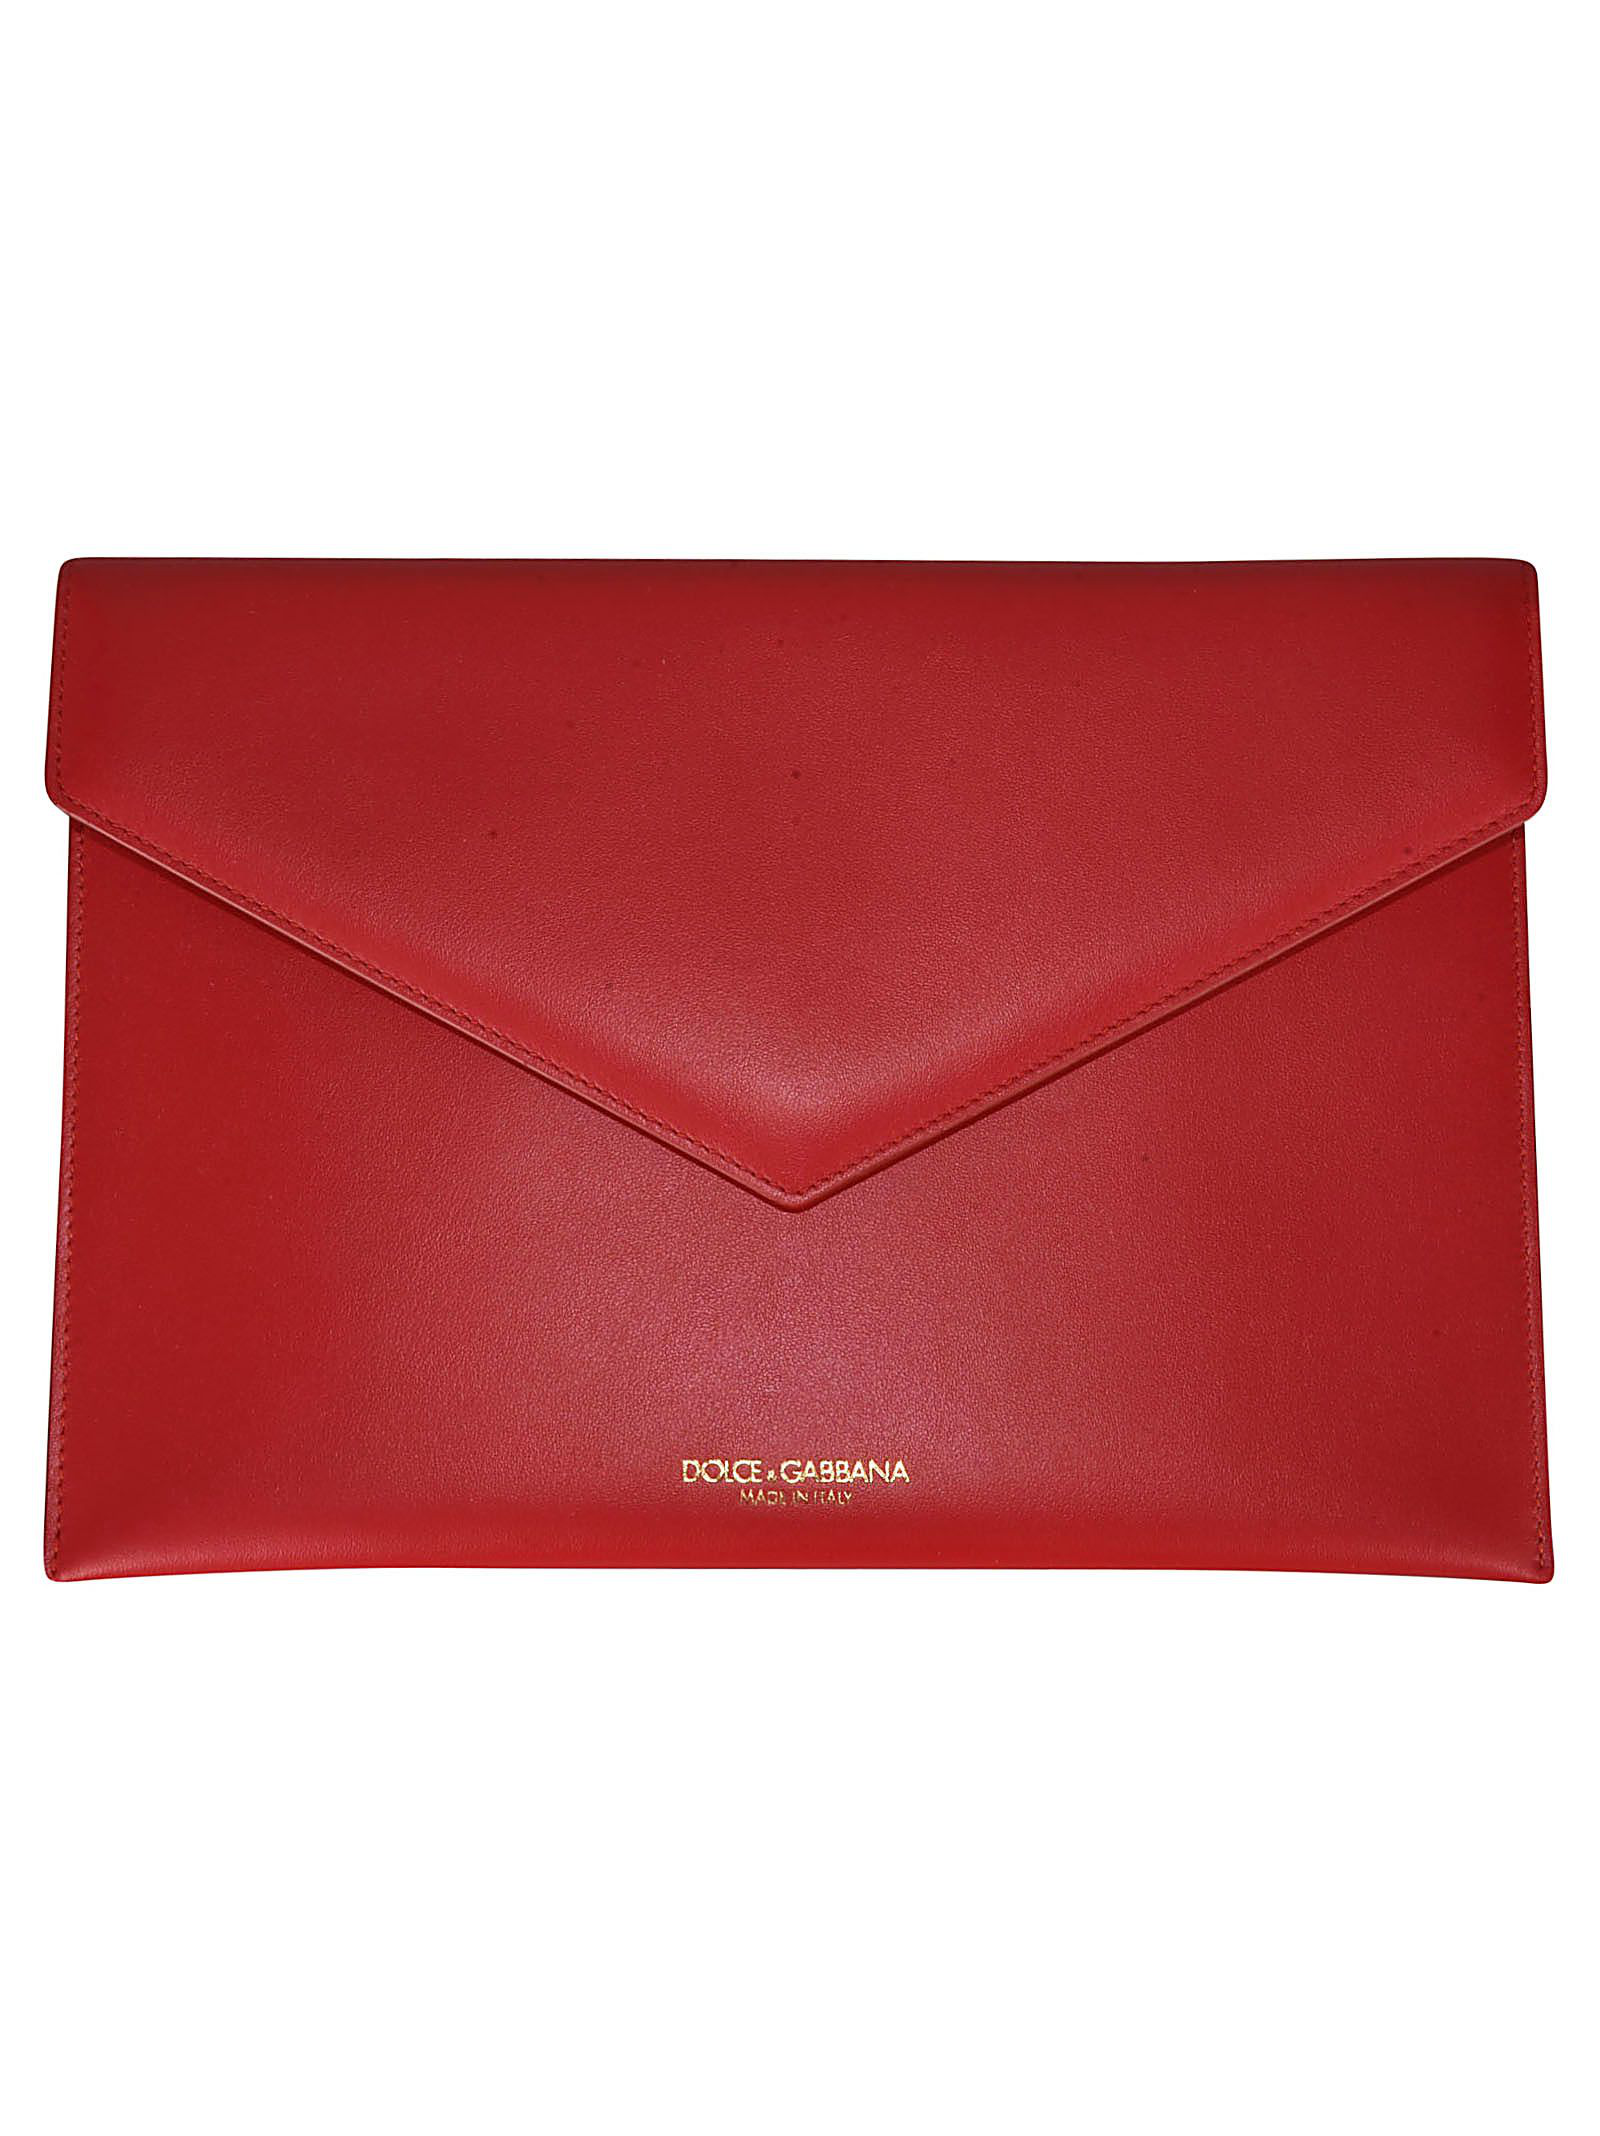 dolce and gabbana envelope clutch